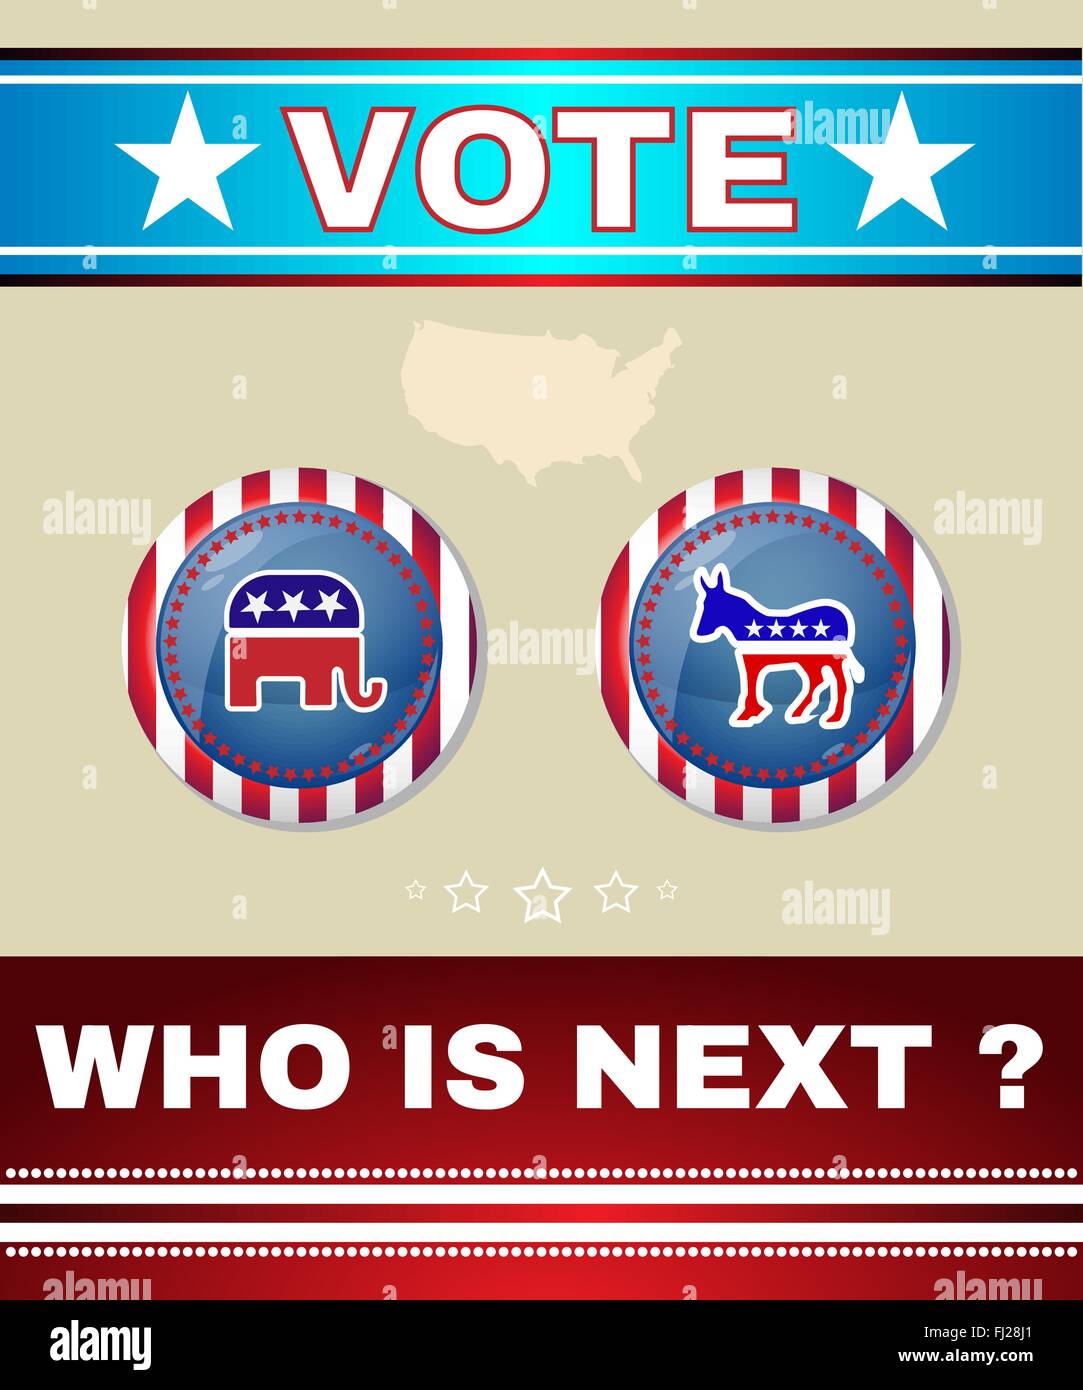 Who is Next President - Election Day 2016 Campaign Social Promotion Banner. Elephant versus Donkey. American Flag's Symbolic. Stock Vector